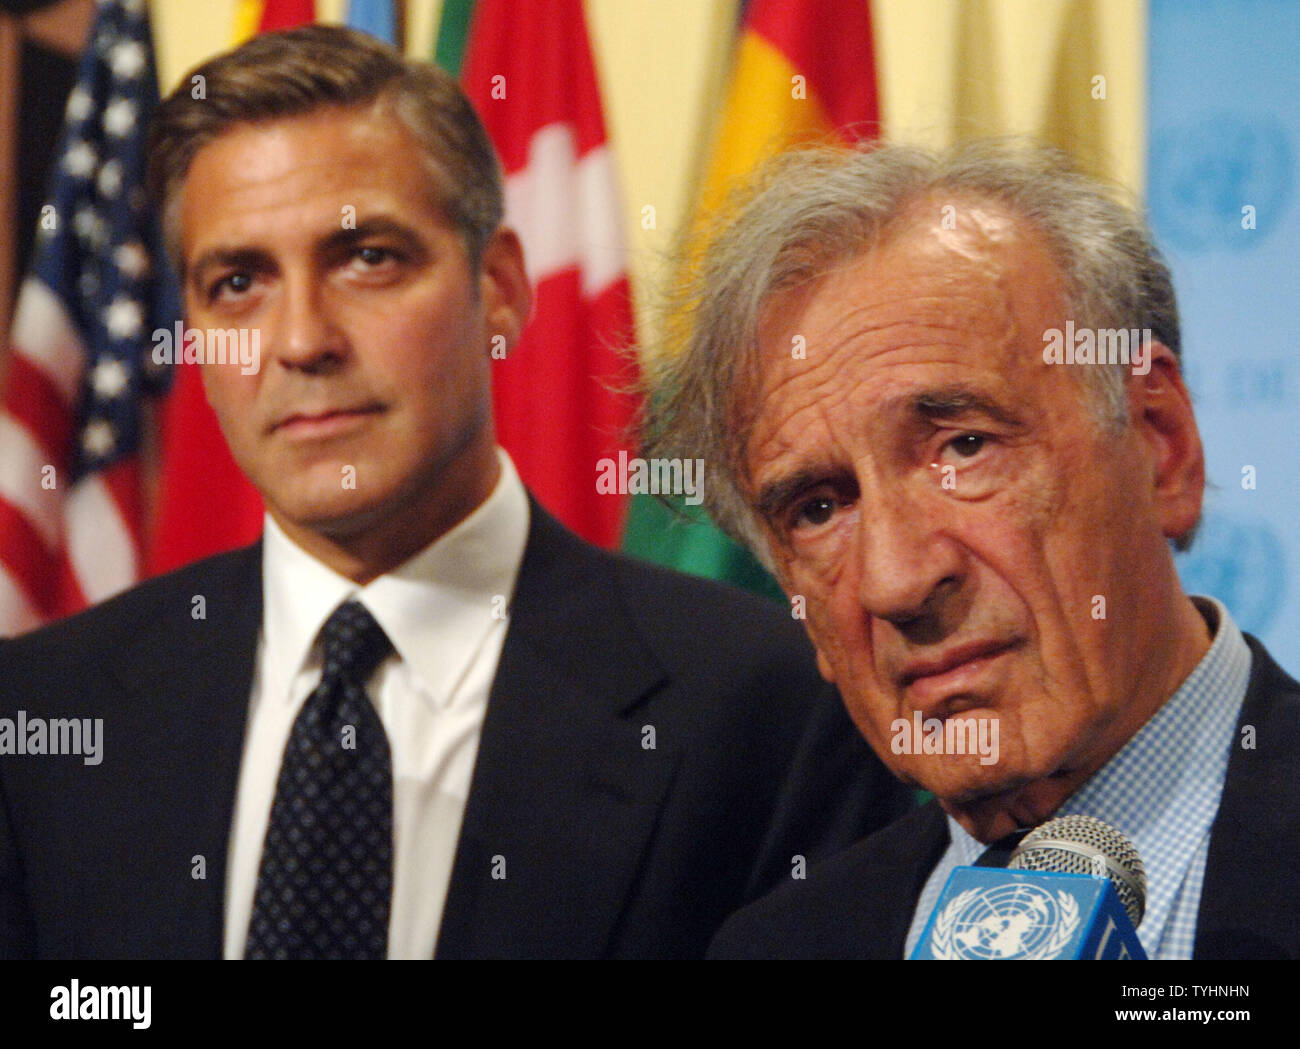 Actor/producer George Clooney and Nobel Peace Prize winner Dr. Elie Wiesel (right) meet the UN media after a 'Arria' style meeting of the United Nations Security Council members on the subject of Dafur, Sudan on September 14, 2006 in New York. The meeting was called for by the U.S. Mission to the UN and the Elie Wiesel Foundation.   (UPI Photo/Ezio Petersen) Stock Photo